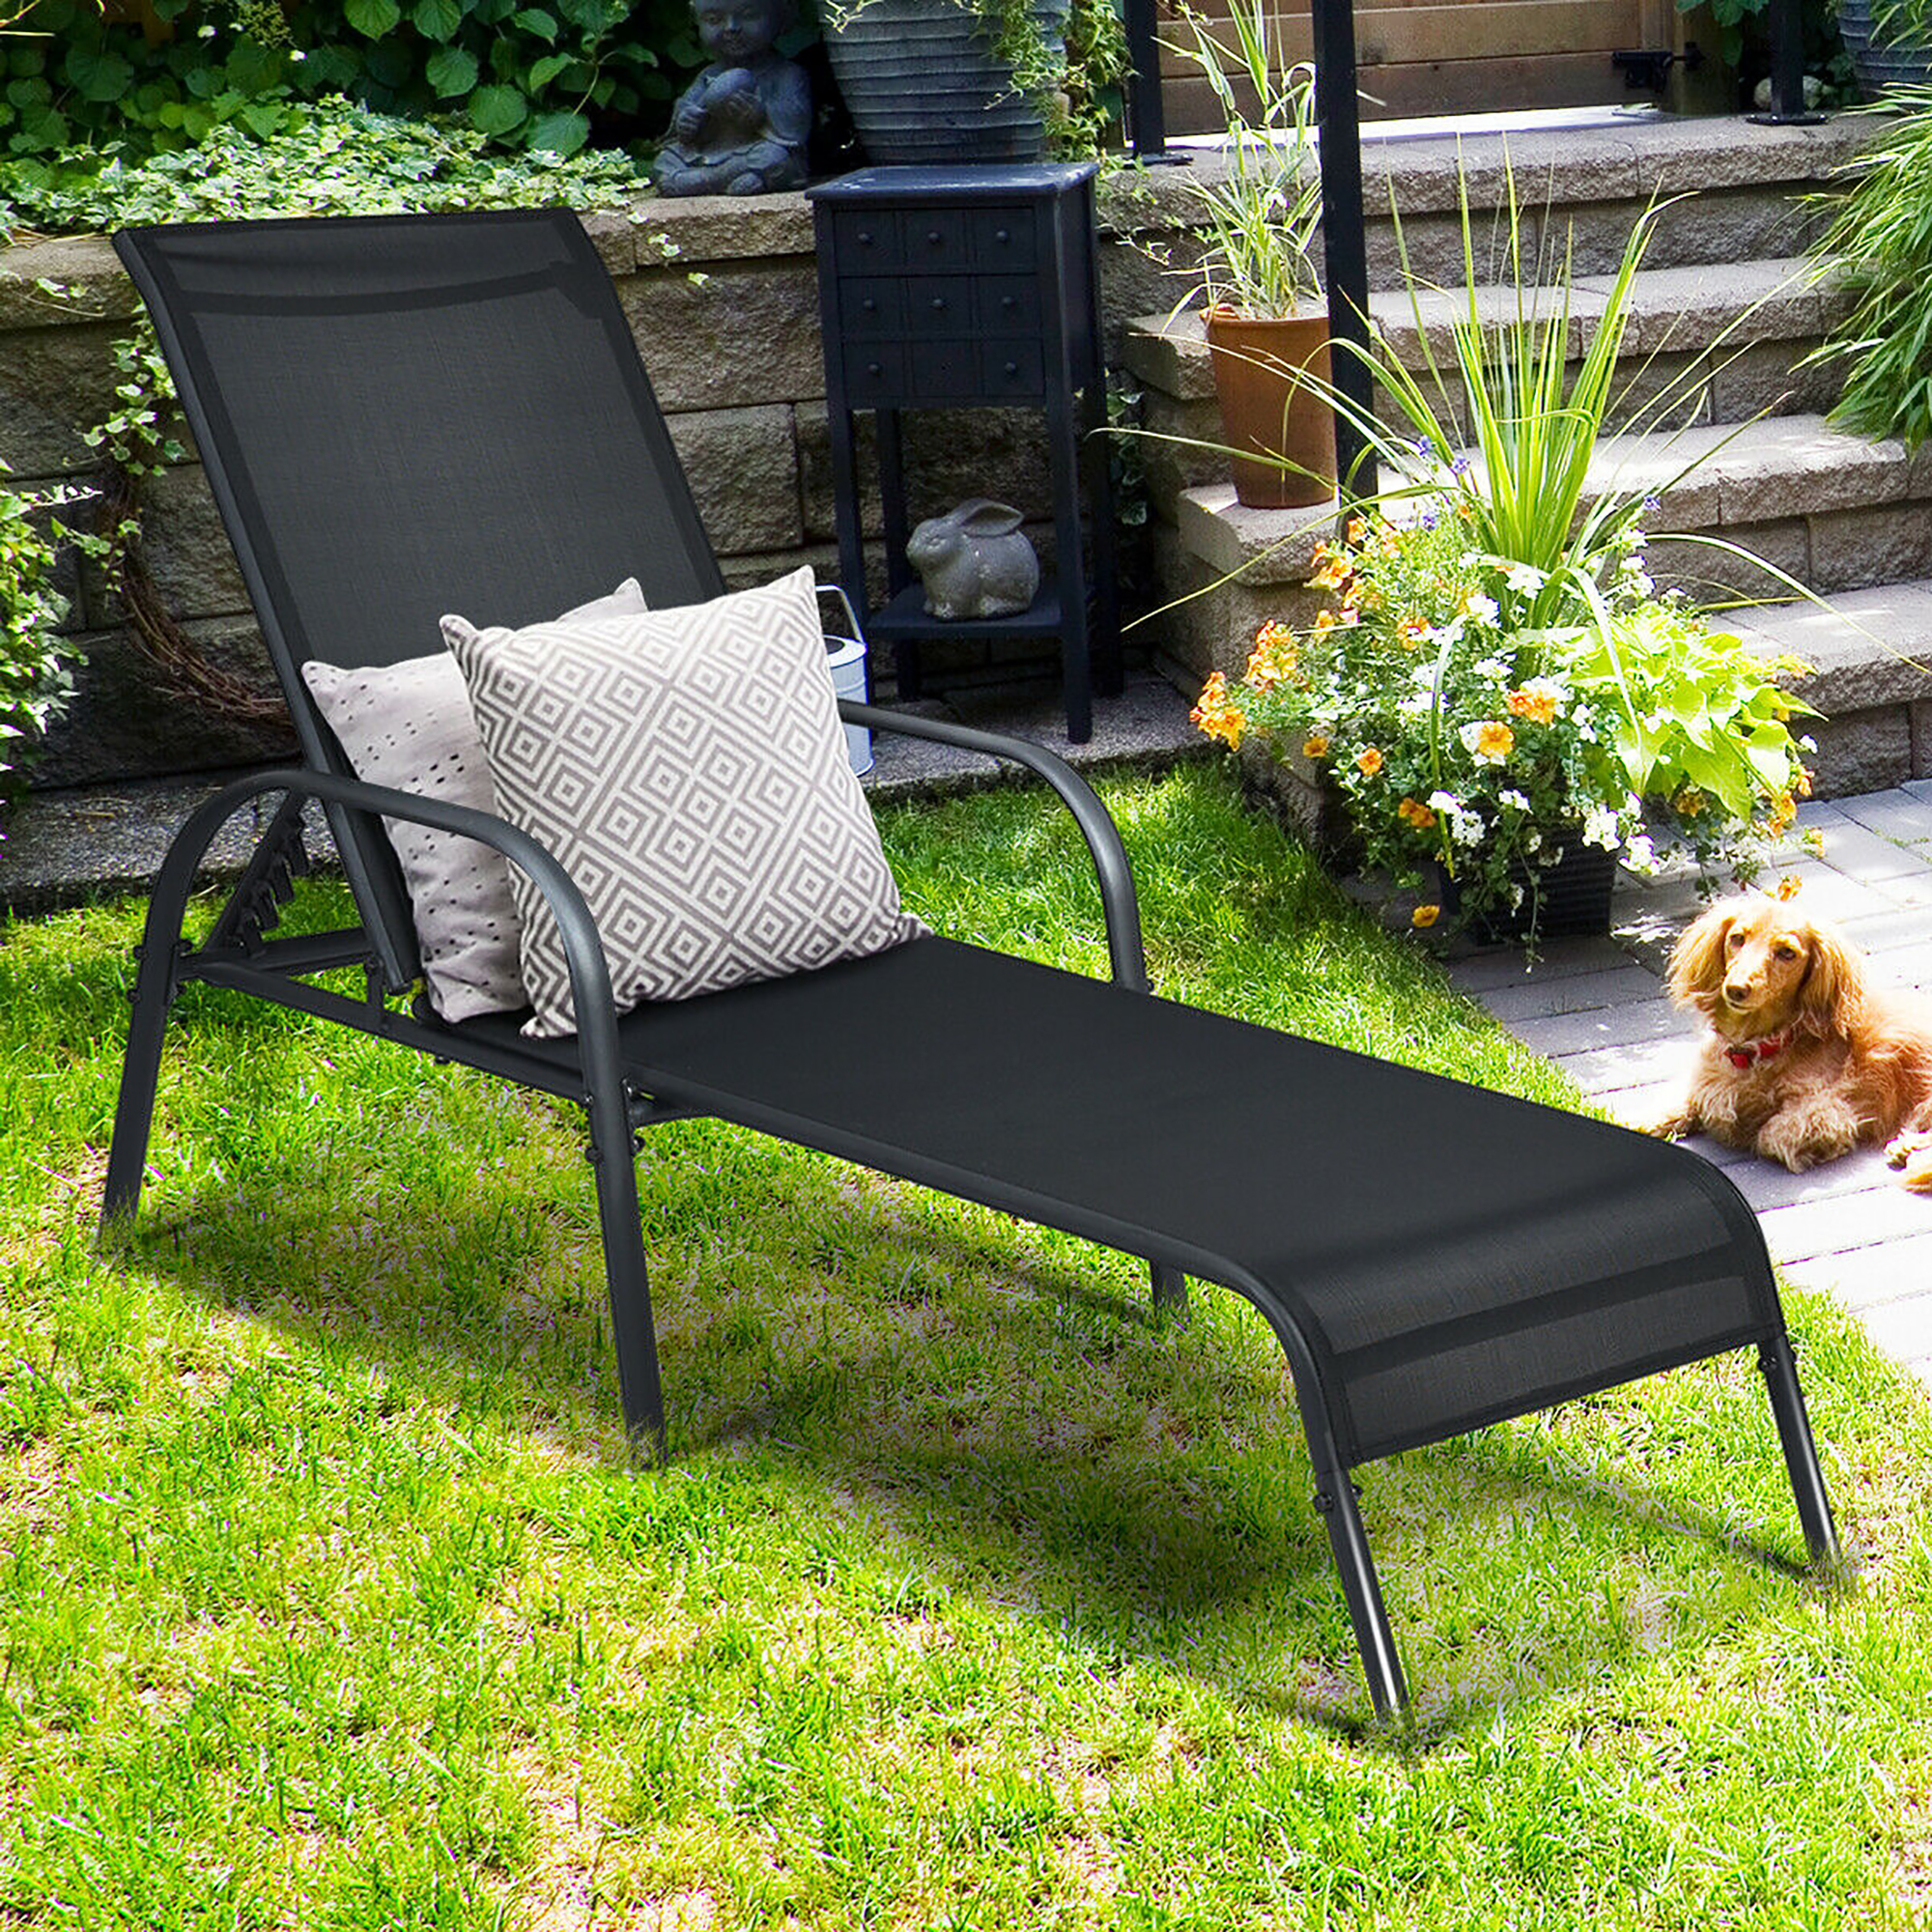 Costway Goplus Patio Chaise Lounge Outdoor Folding Recliner Chair w/ Adjustable Backrest Black